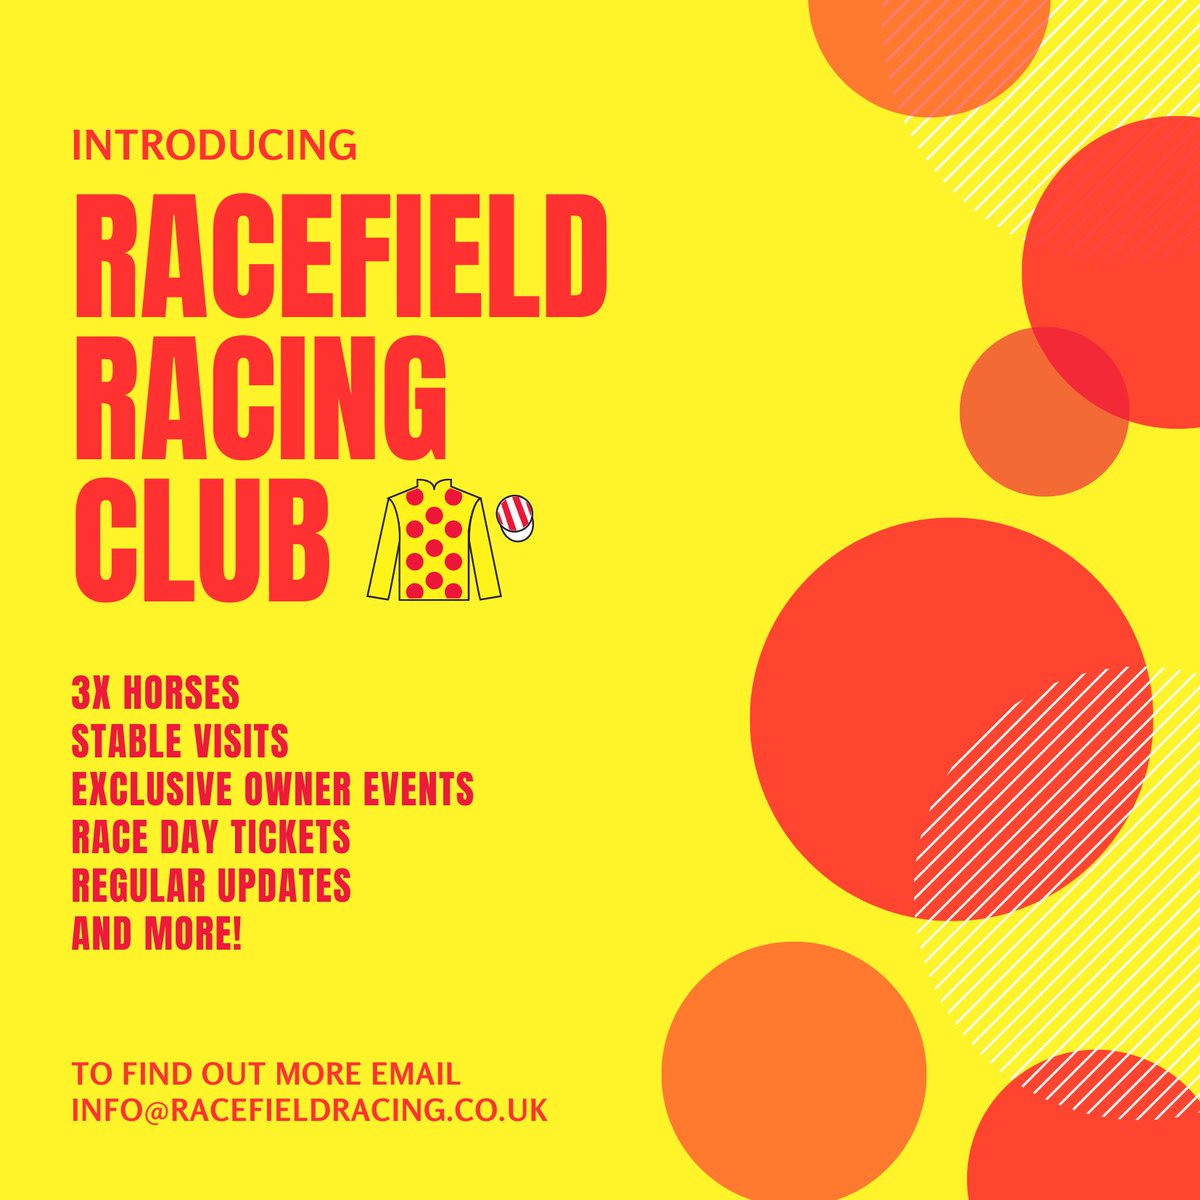 We are delighted to introduce Racefield Racing Club, the official Racing Club for Racefield Stables and trainer @philmcentee1 🟡🔴 The annual fee consists of 3 horses with many perks including stable visits, race day events and more! 📧 info@racefieldracing.co.uk